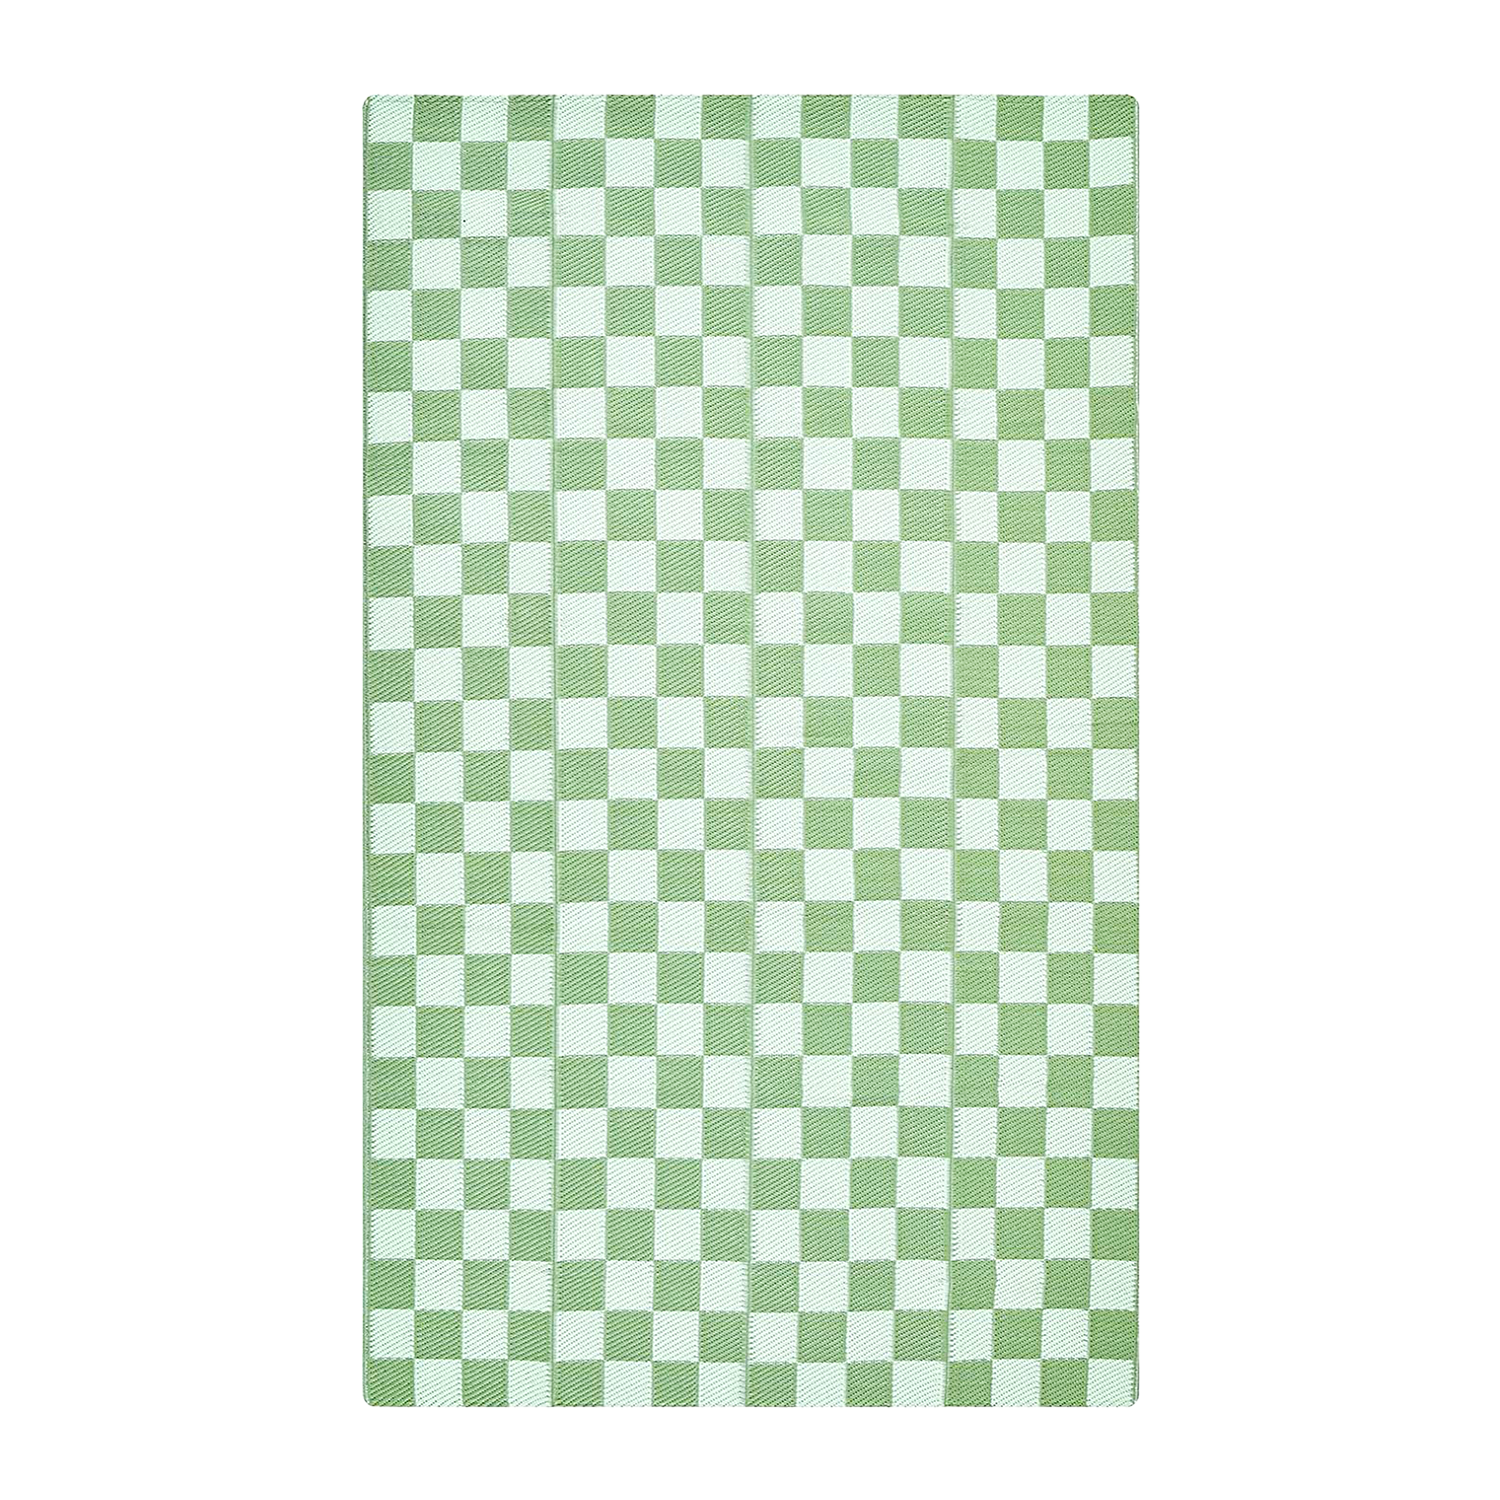 Green Checkerboard Plastic Outdoor Rug from Amazon